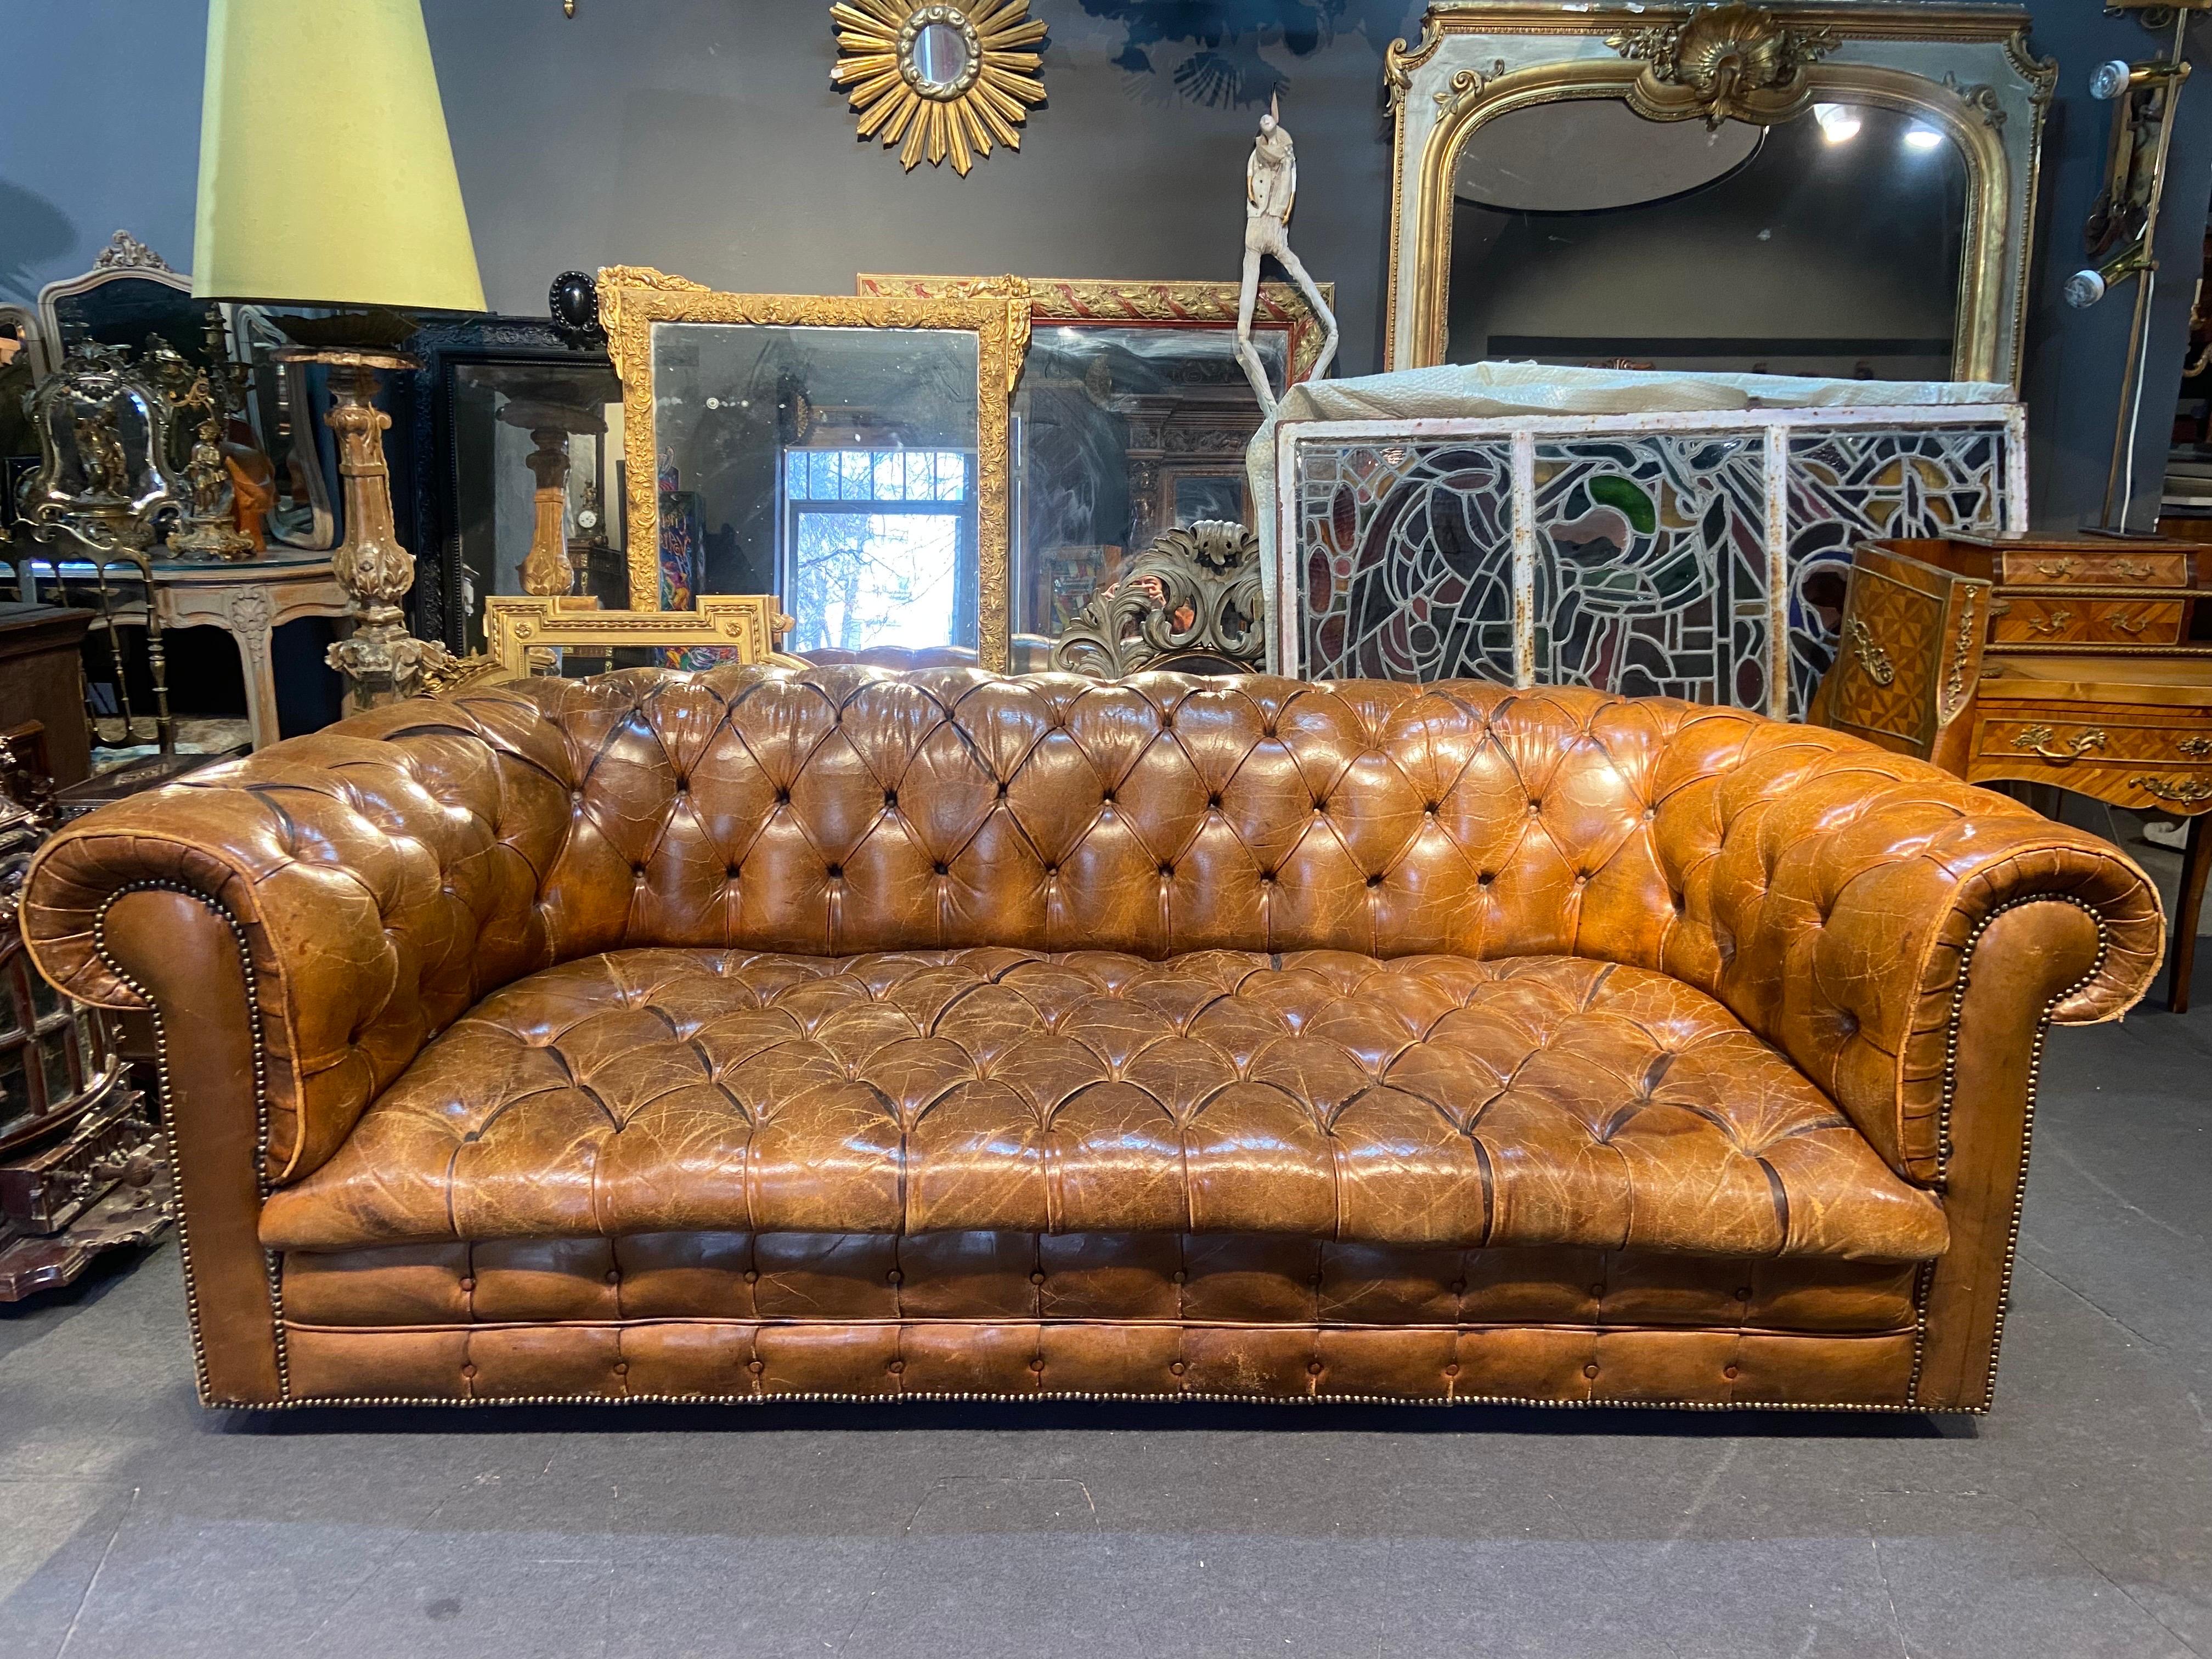 Classic Chesterfield three-seated sofa in cognac brown leather. This traditional English- style sofa features a button-tufted interior, roll-over arms and legs raised on casters. No restorations and quite condition.
United Kingdom, circa 1900.